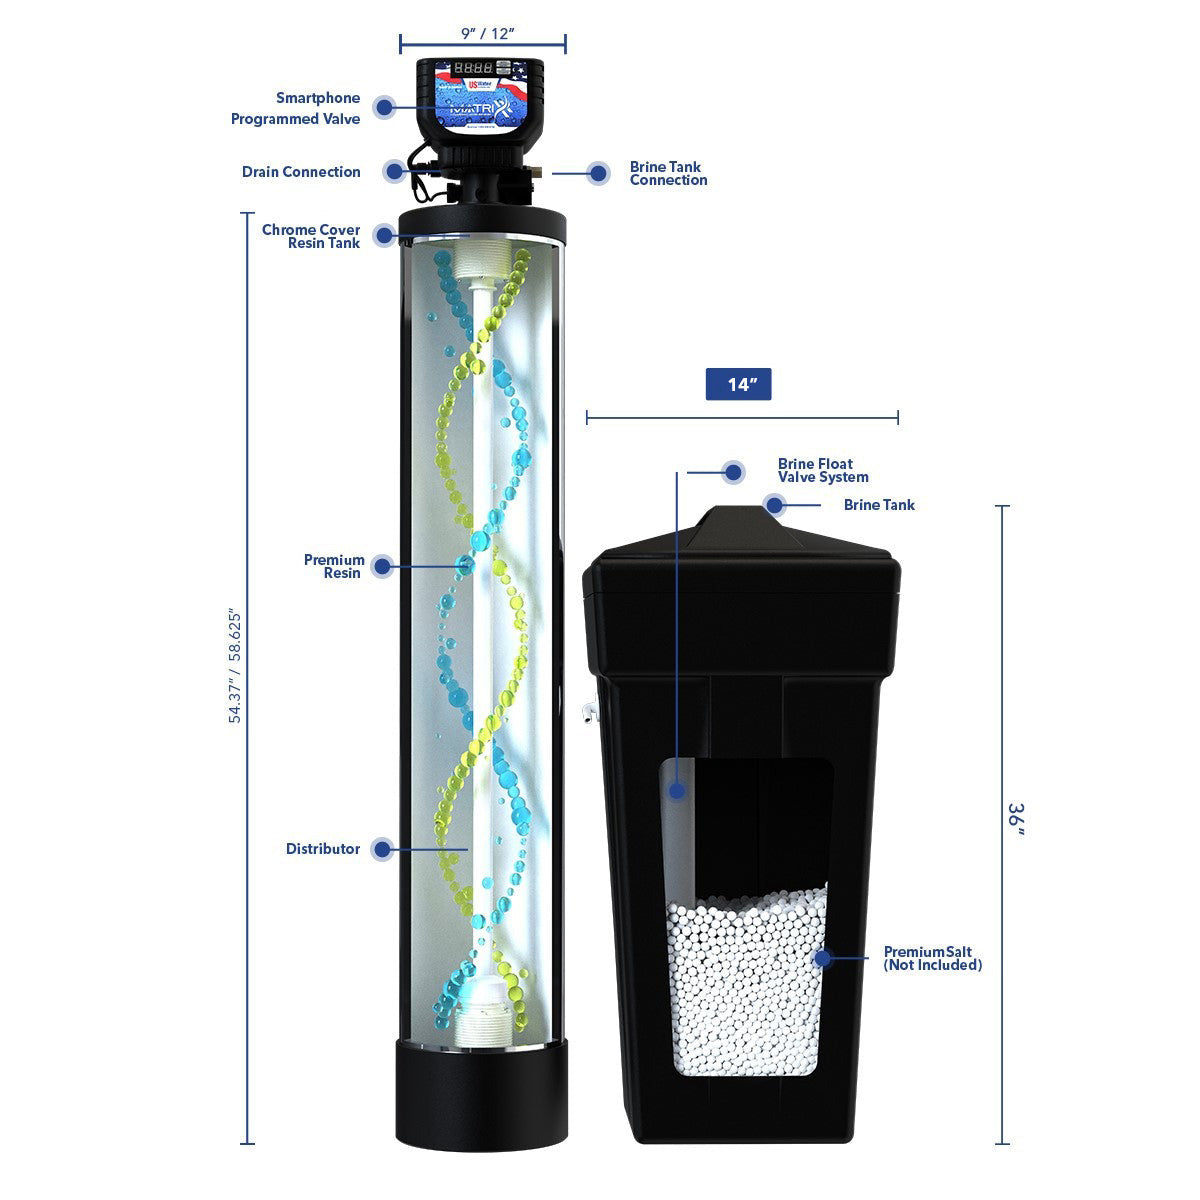 Matrixx Tannin Removal System Info Graphic and Cutaway